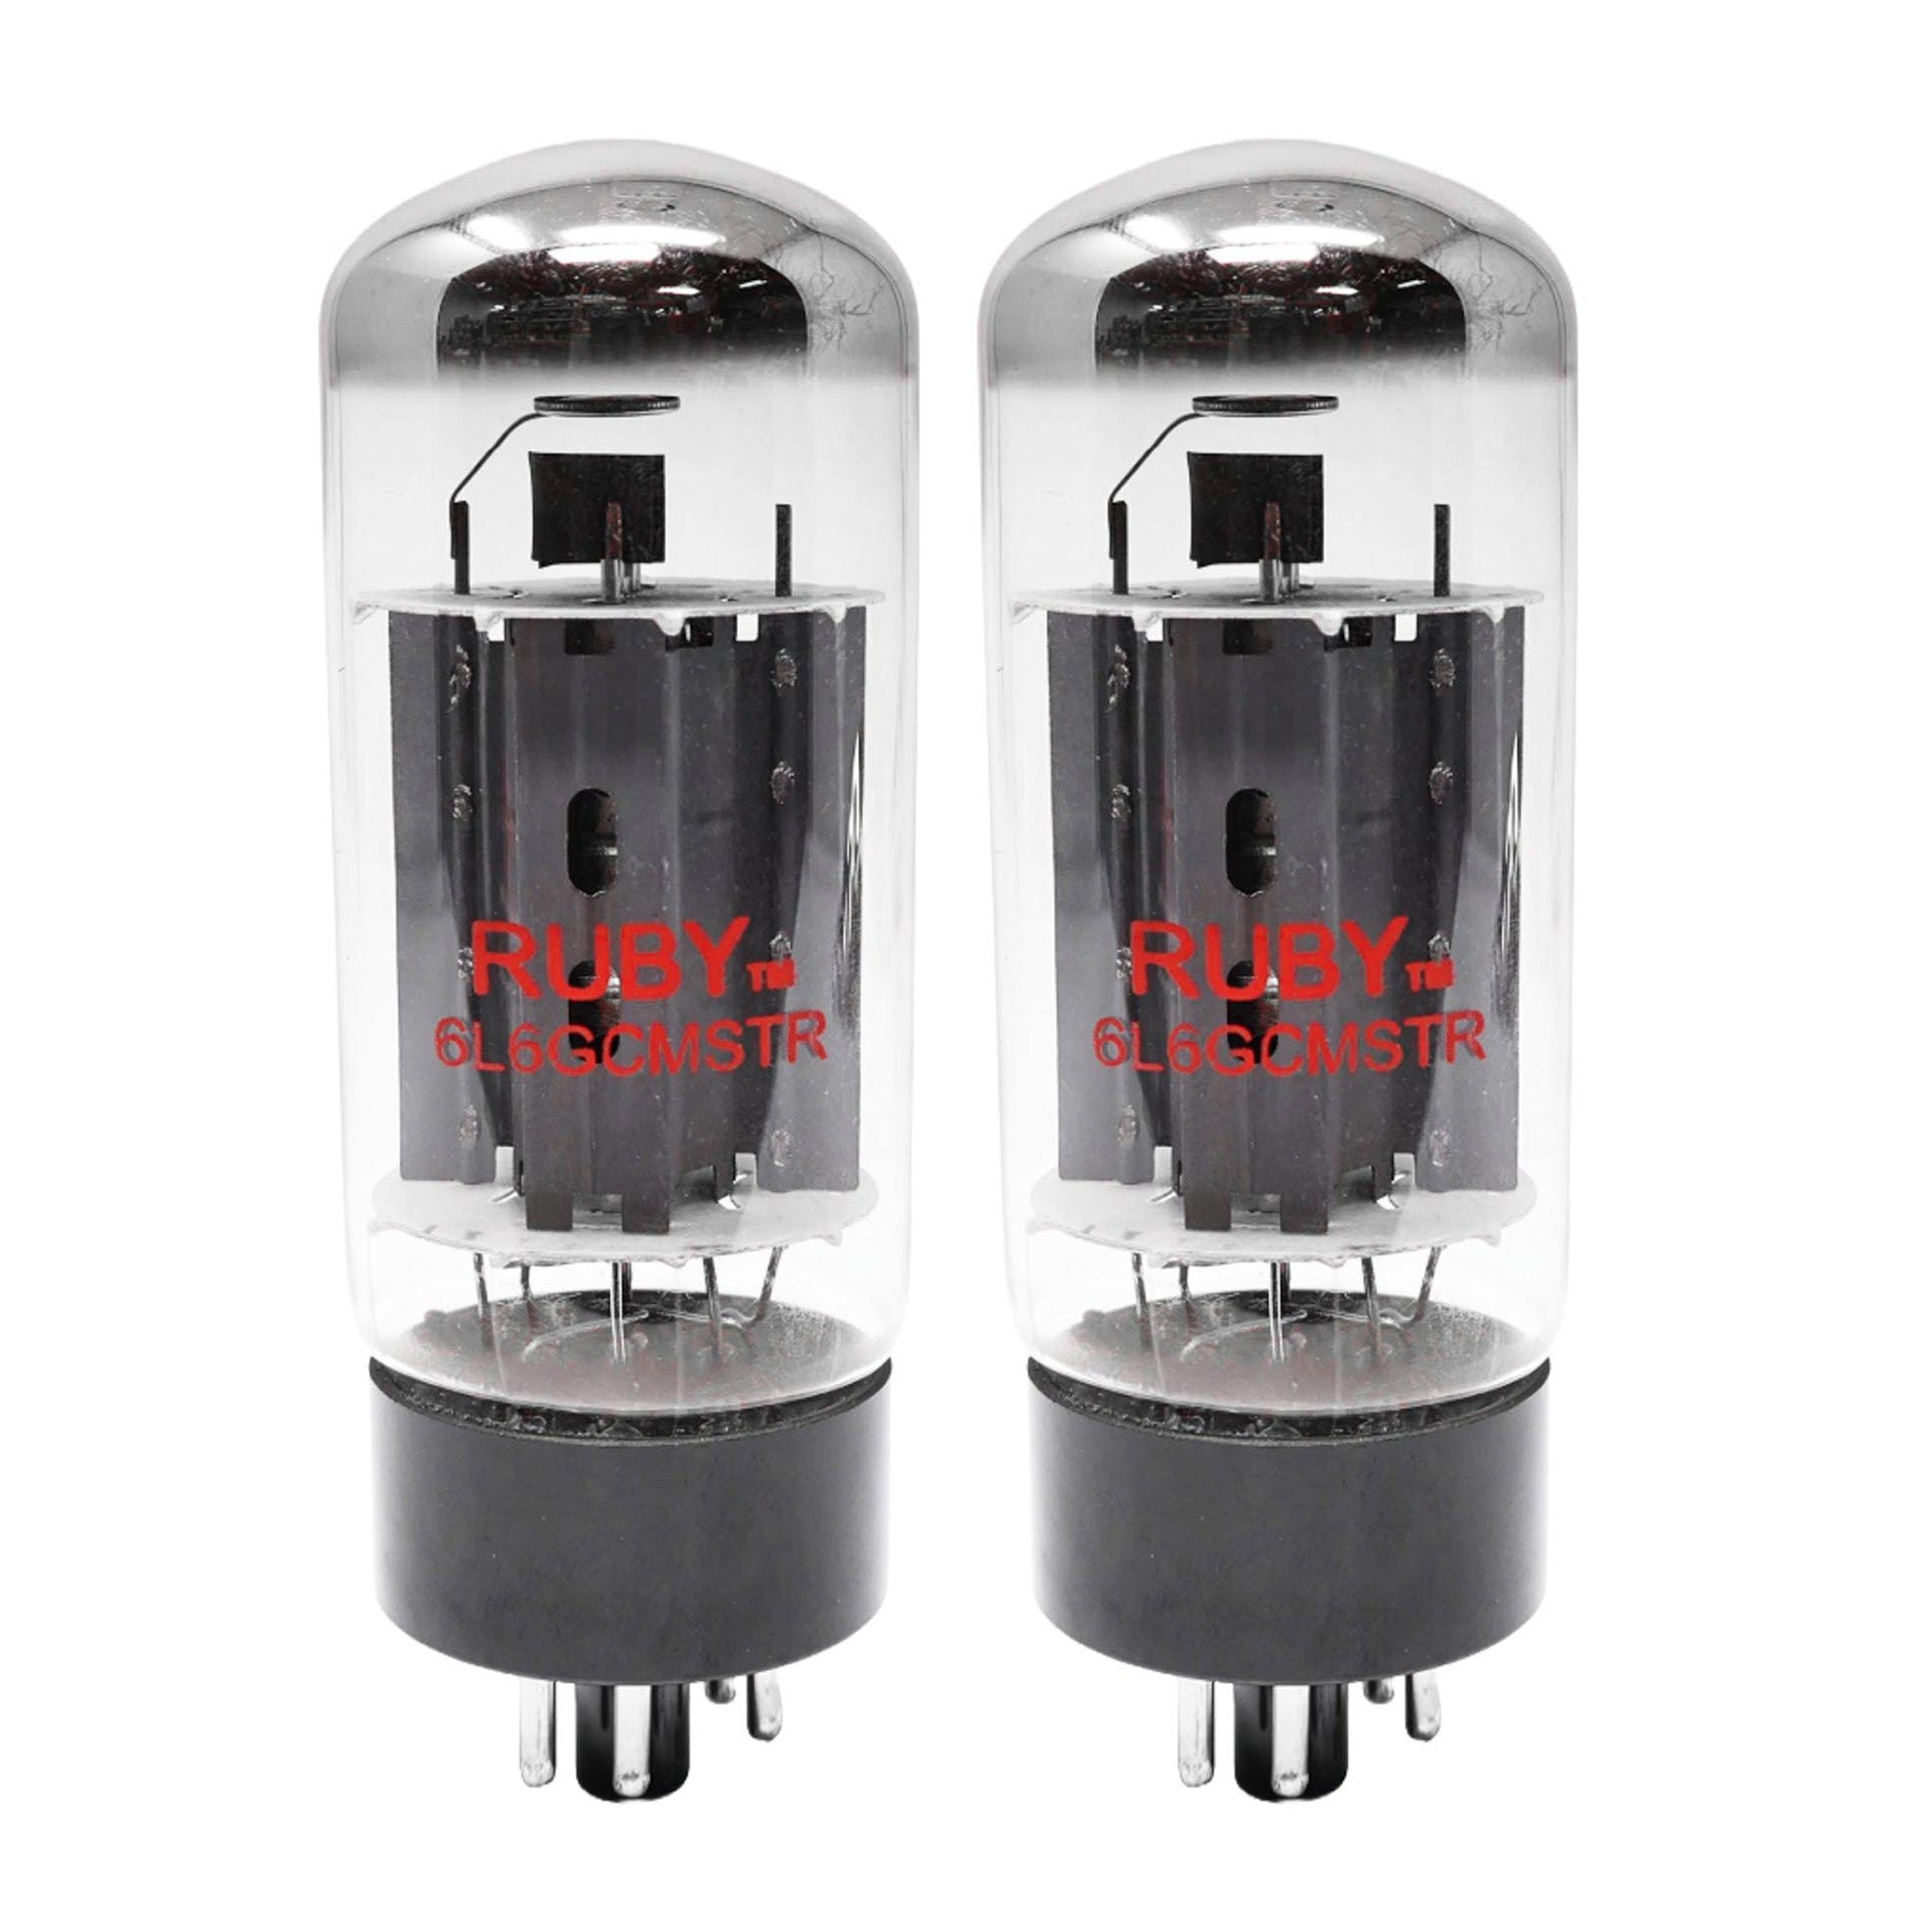 6L6GCMSTR Power Vacuum Tube Matched Pair